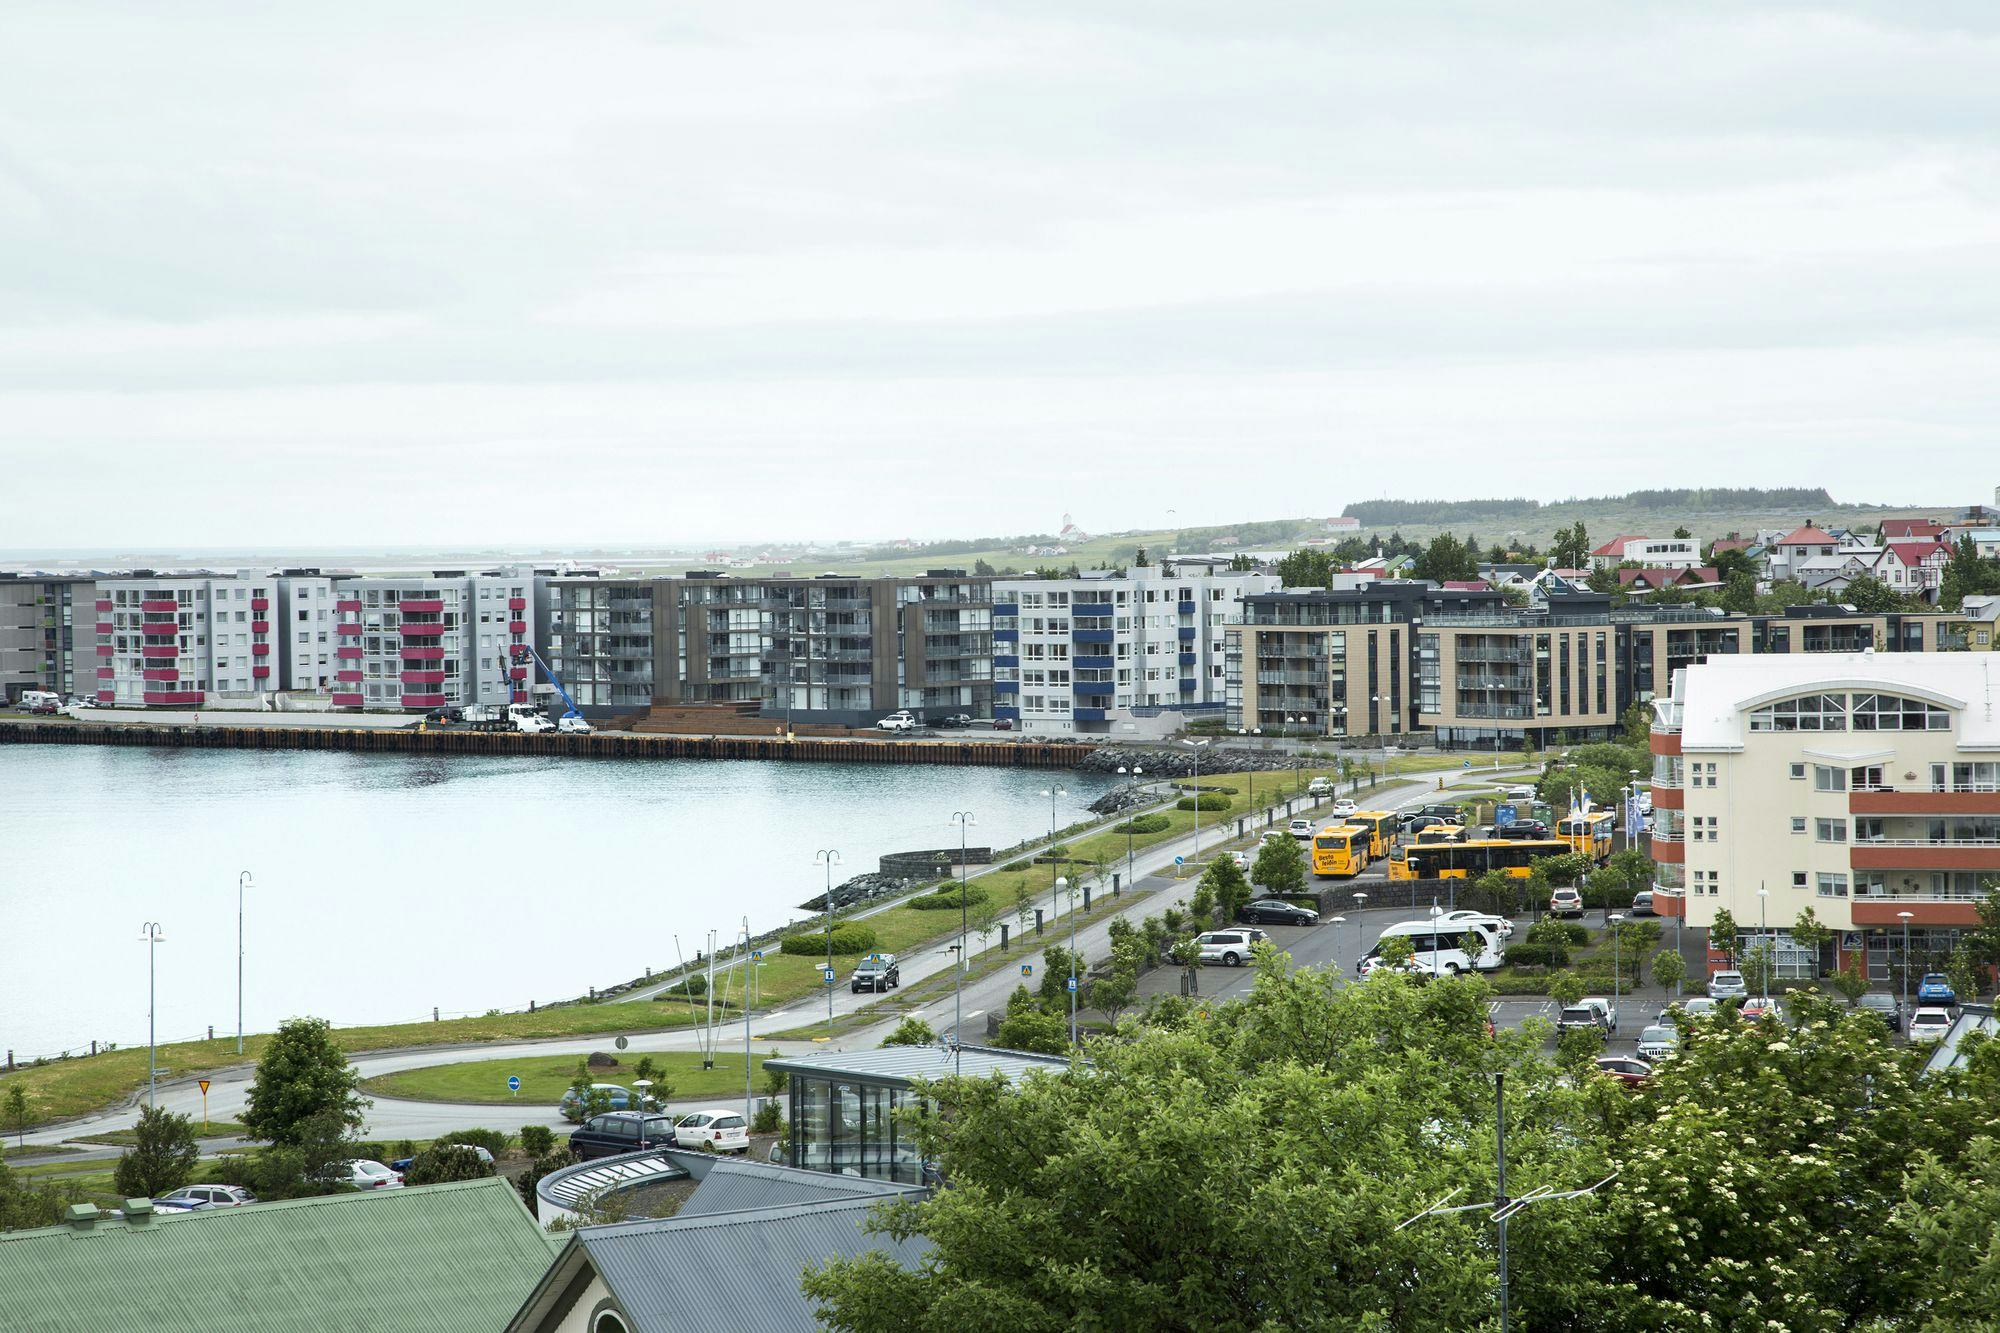 Overview of Hafnarfjörður, apartment blocks by the coastline, the sea and coastline on the left in the foreground, cars and a street running along it, trees and roofs in the foreground